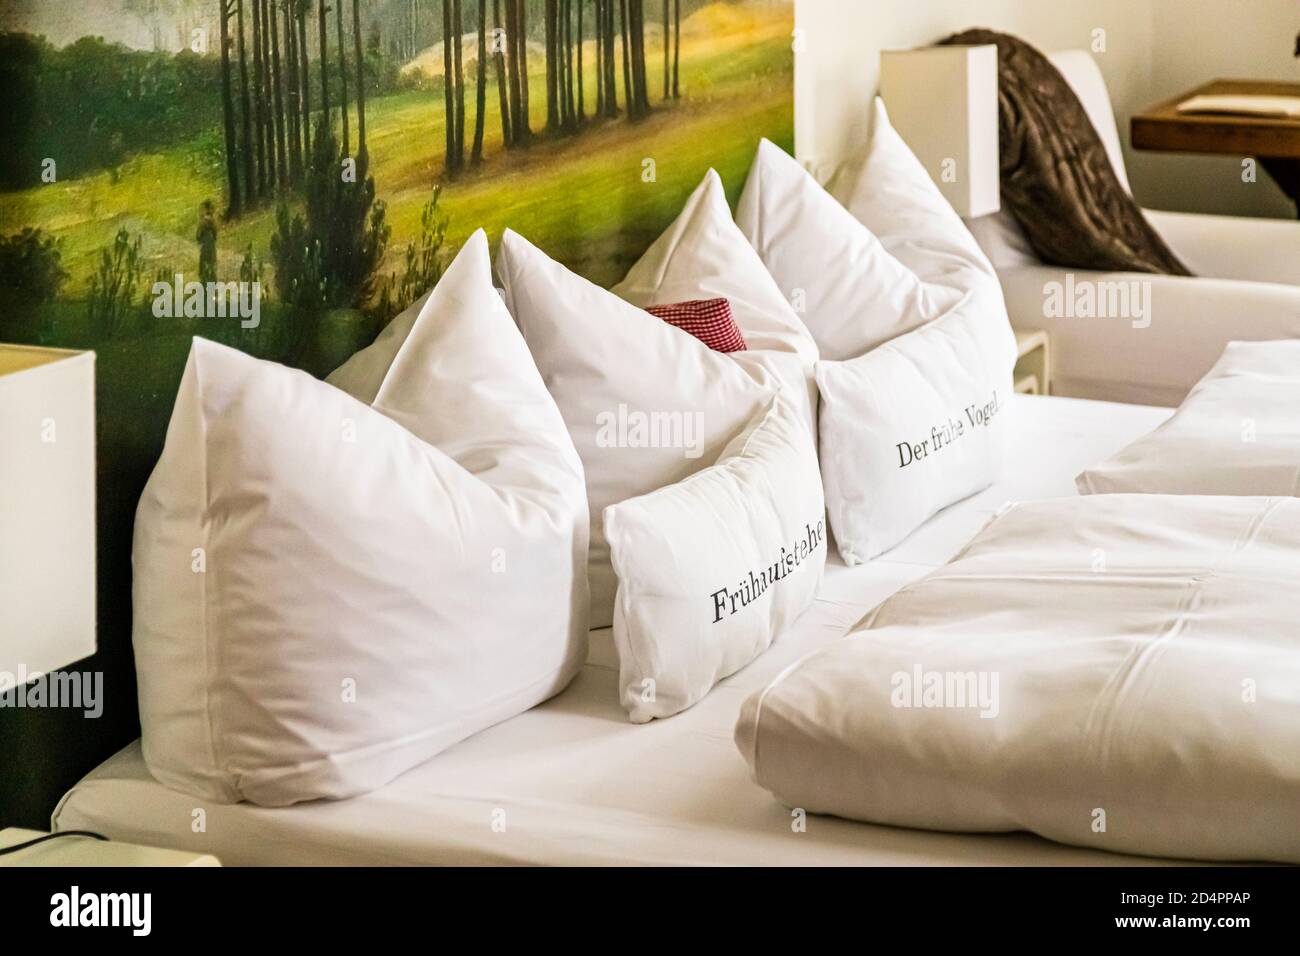 No matter what kind of excursions you take around Kavaliershaus Schloss Blücher during the day, in the evening you can look forward to art on the bed and an originally furnished suite. Hotel Kavaliershaus in Fincken, Röbel-Müritz, Germany Stock Photo